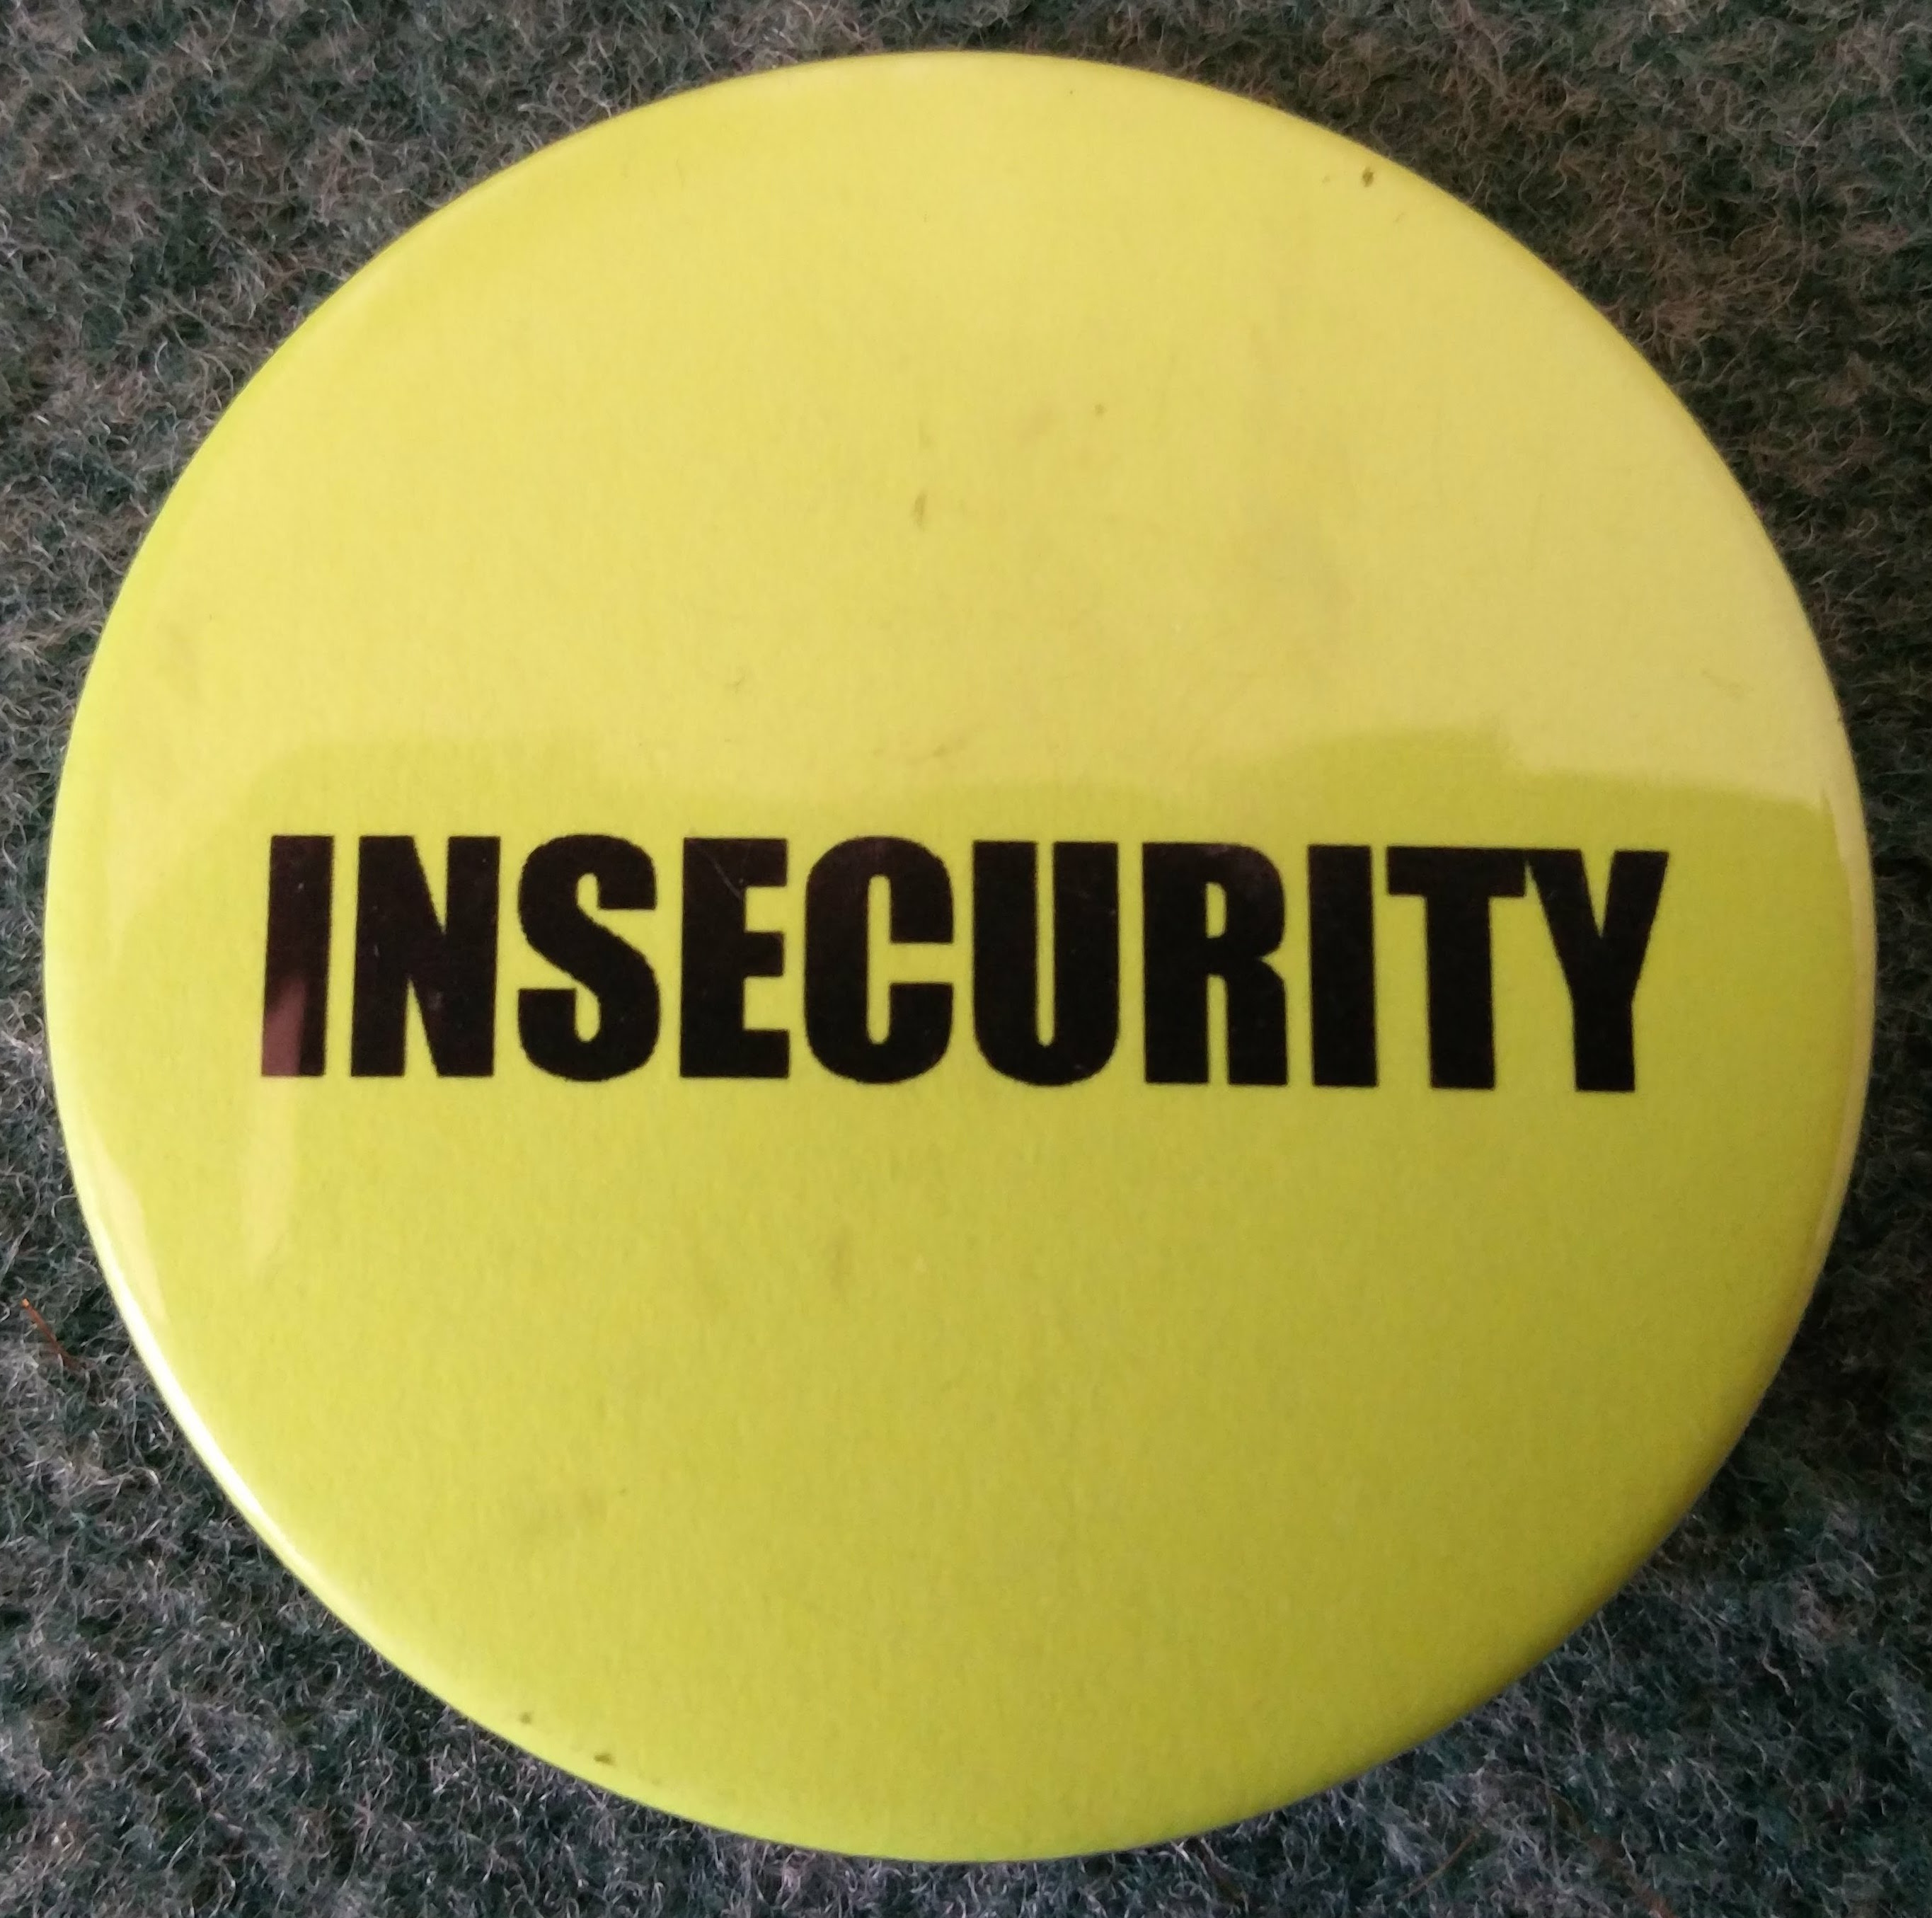 Insecurity button